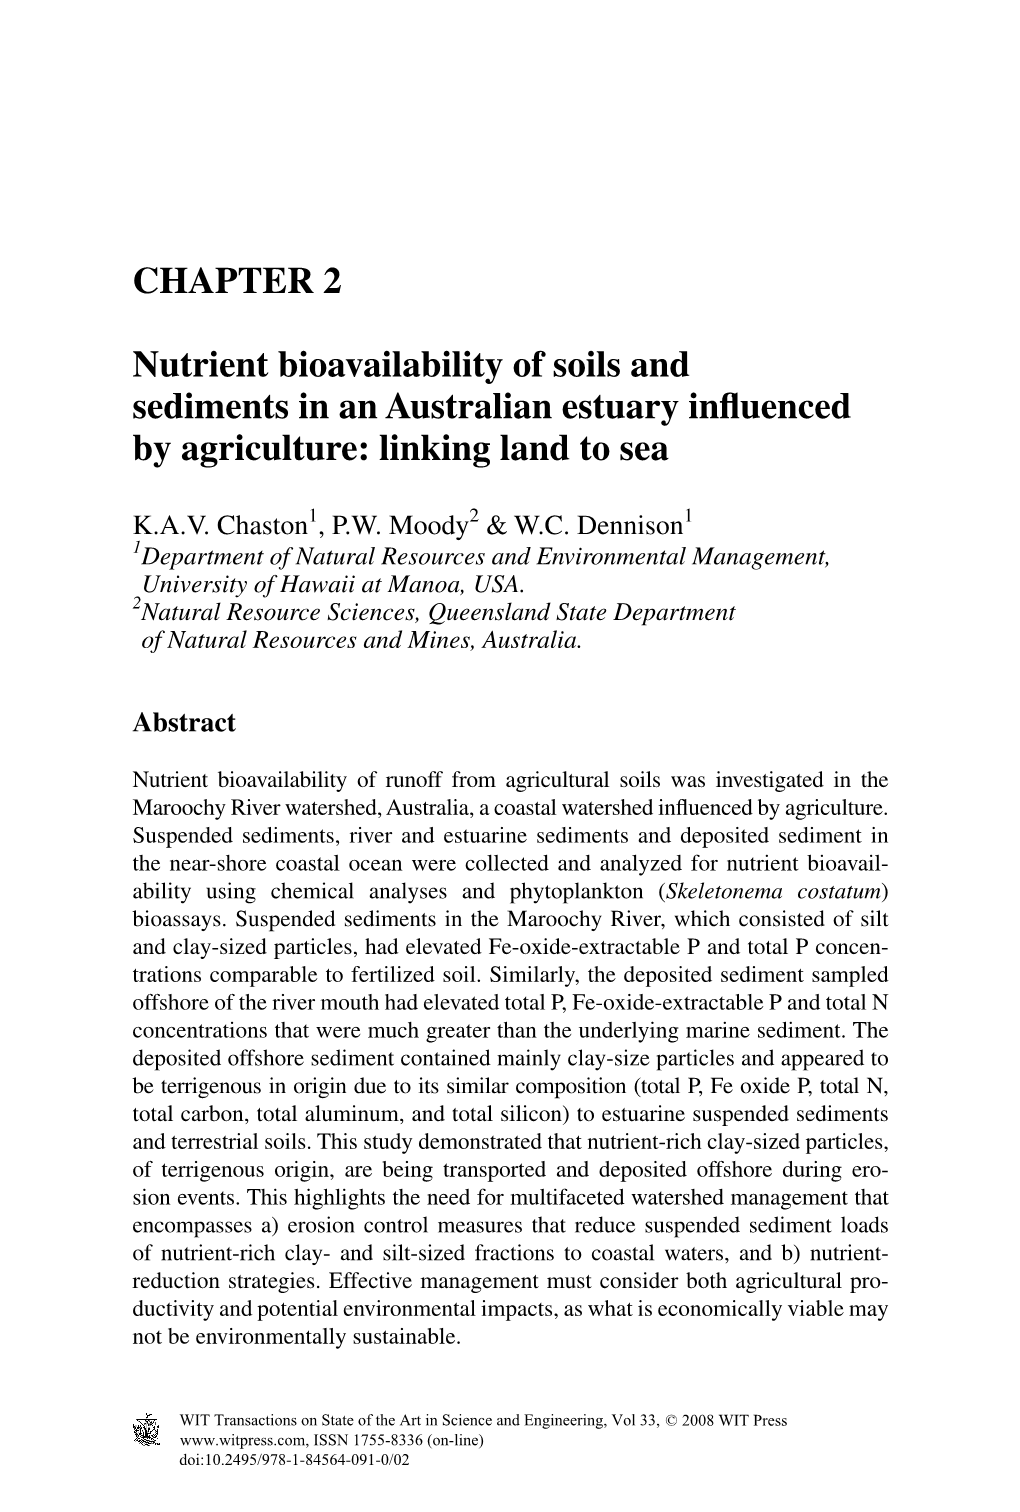 CHAPTER 2 Nutrient Bioavailability of Soils and Sediments In